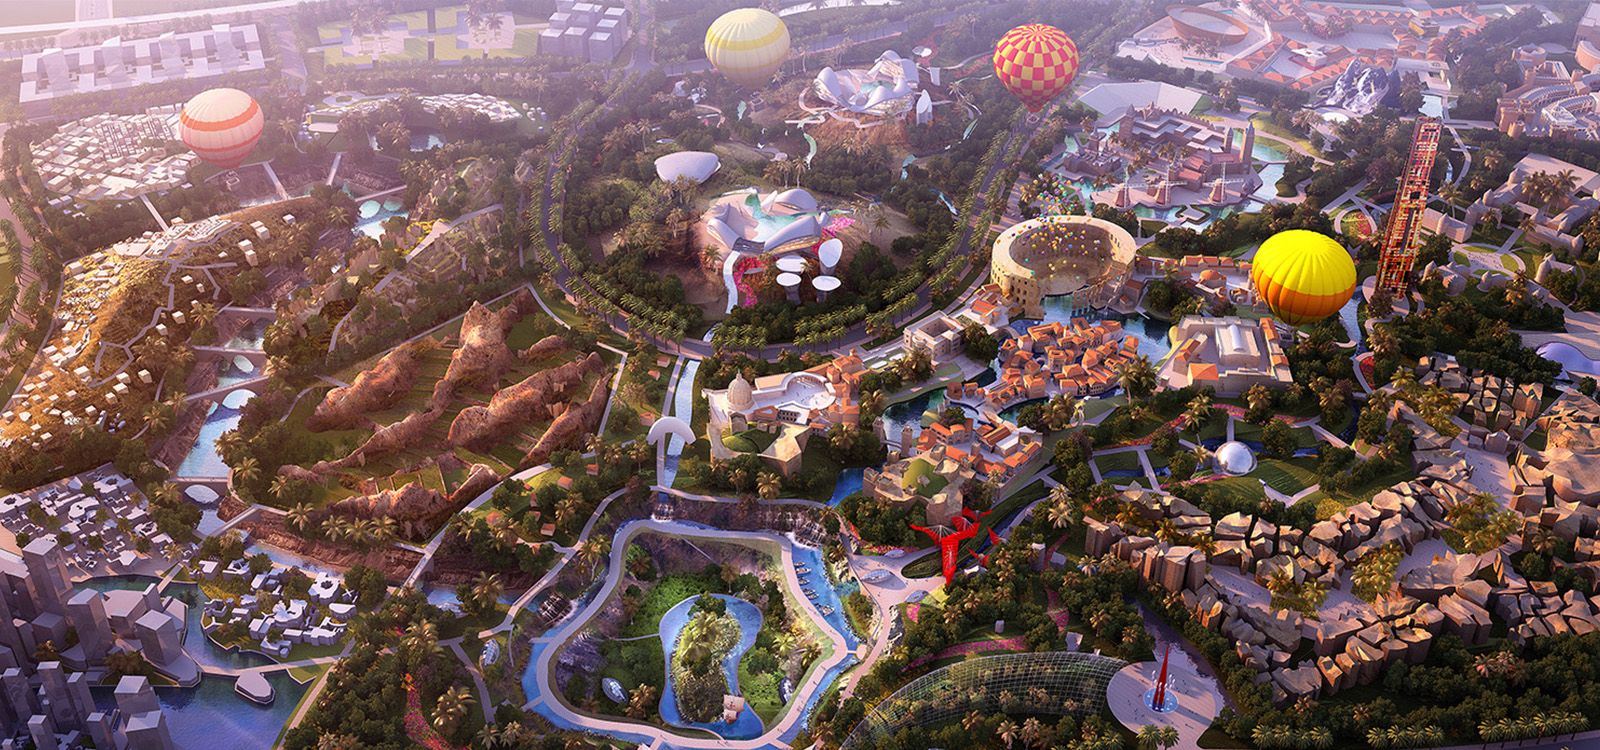 Global 100 theme park in China design overview